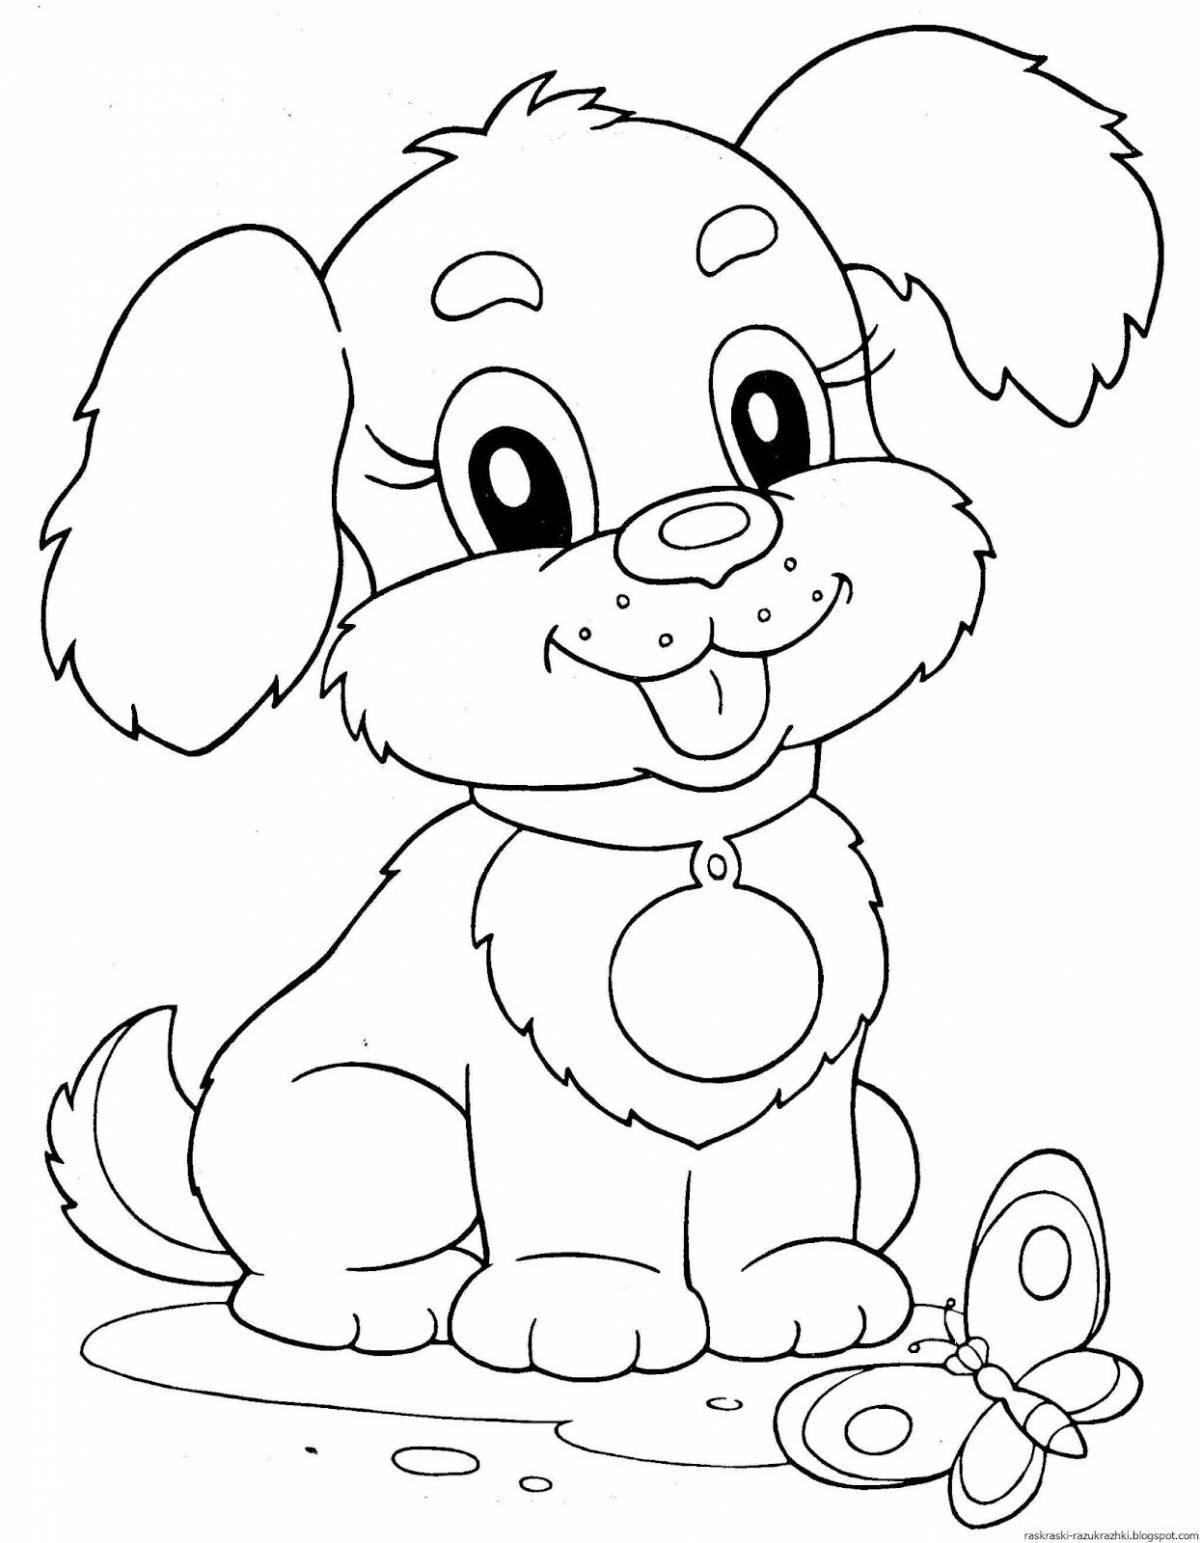 Brave coloring dog for children 4-5 years old